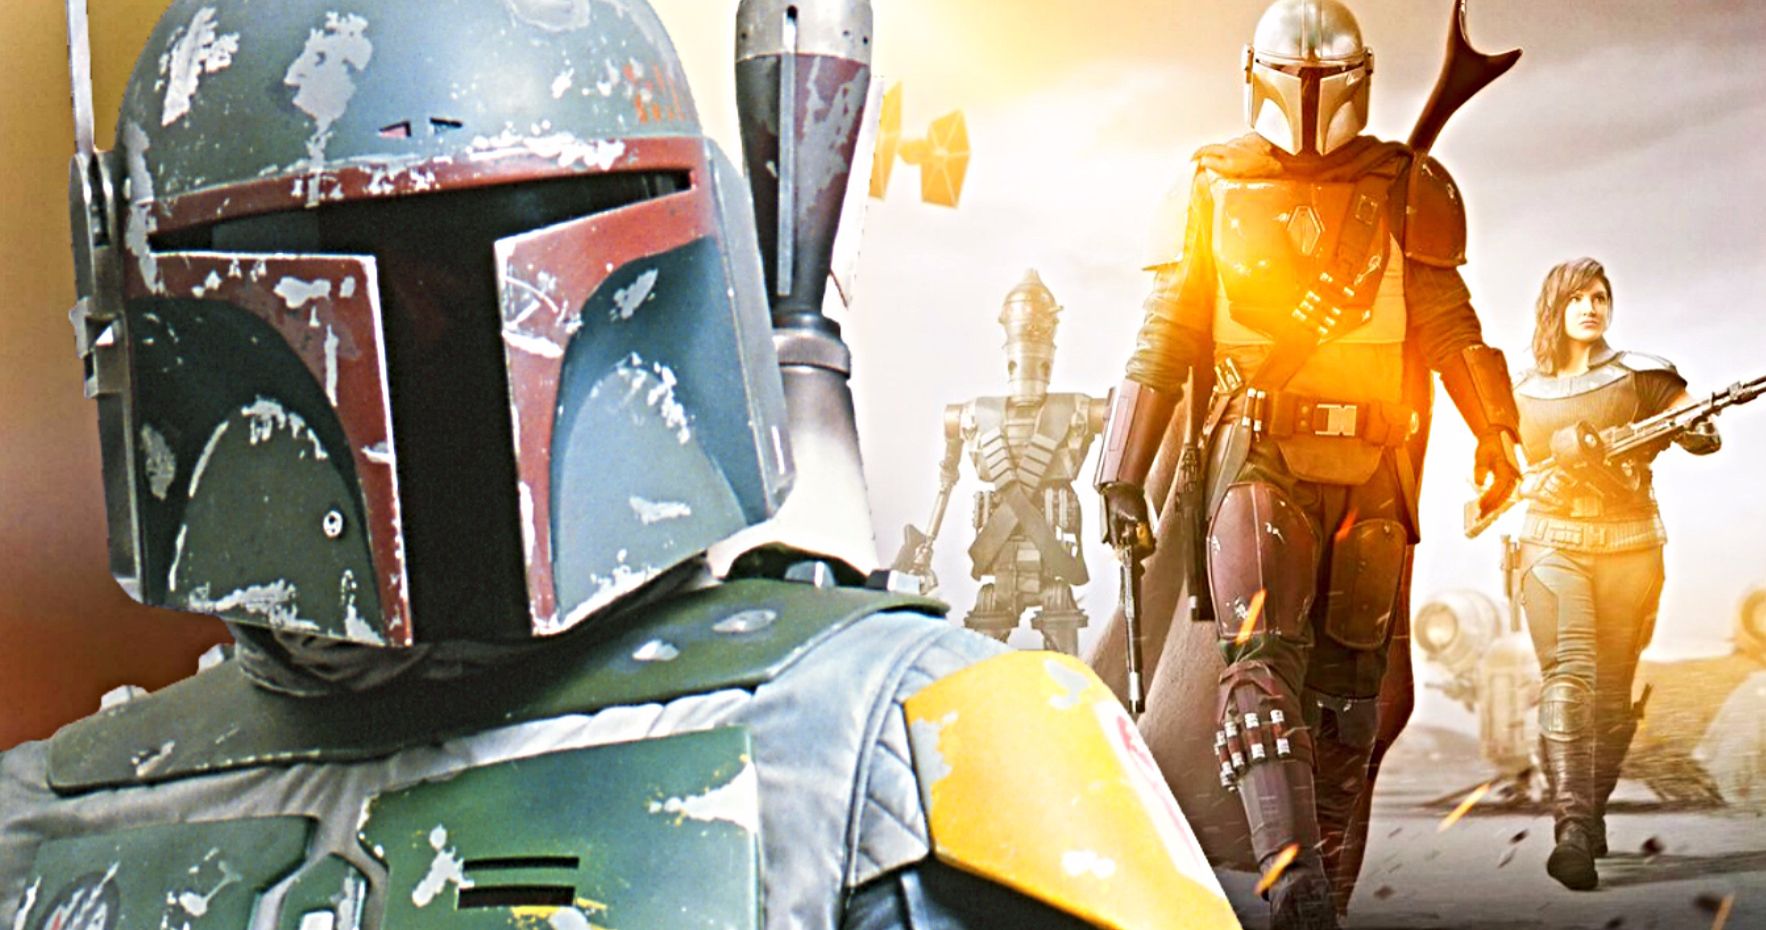 Will The Mandalorian Pave the Way for a Boba Fett Movie?